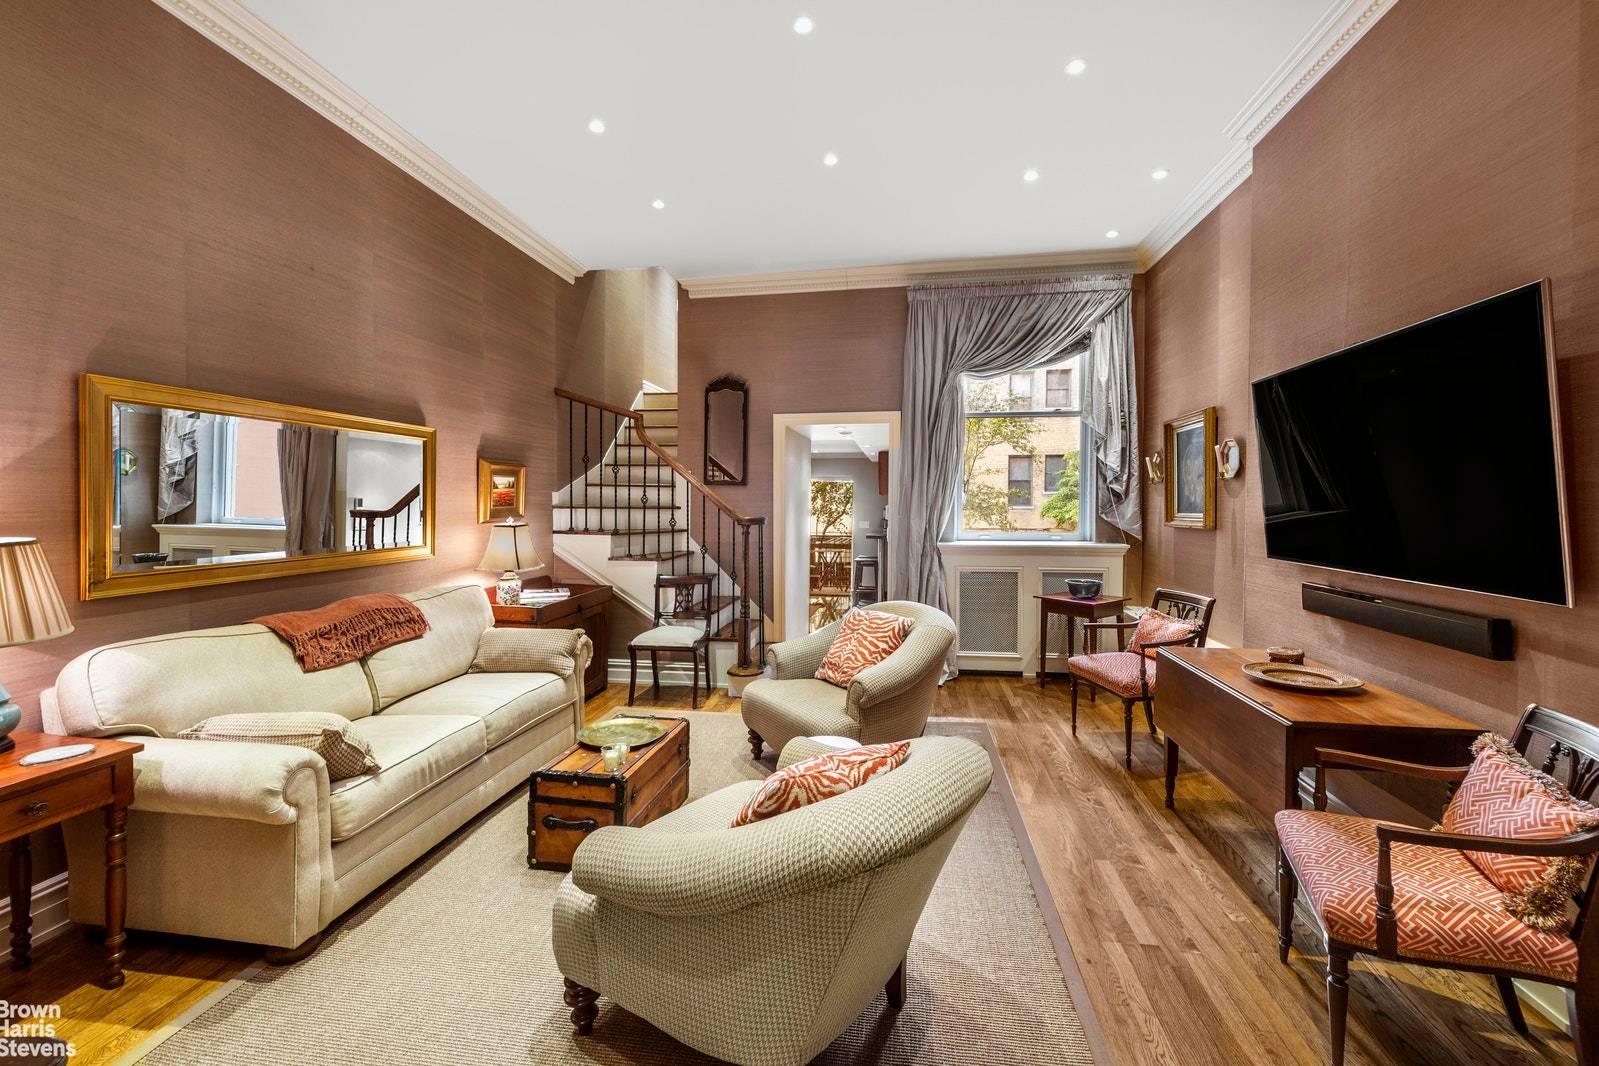 Arguably one of the nicest streets on the UWS, located on a tranquil, tree lined landmark block moments from the Museum of Natural History and Central Park, this duplex apartment ...